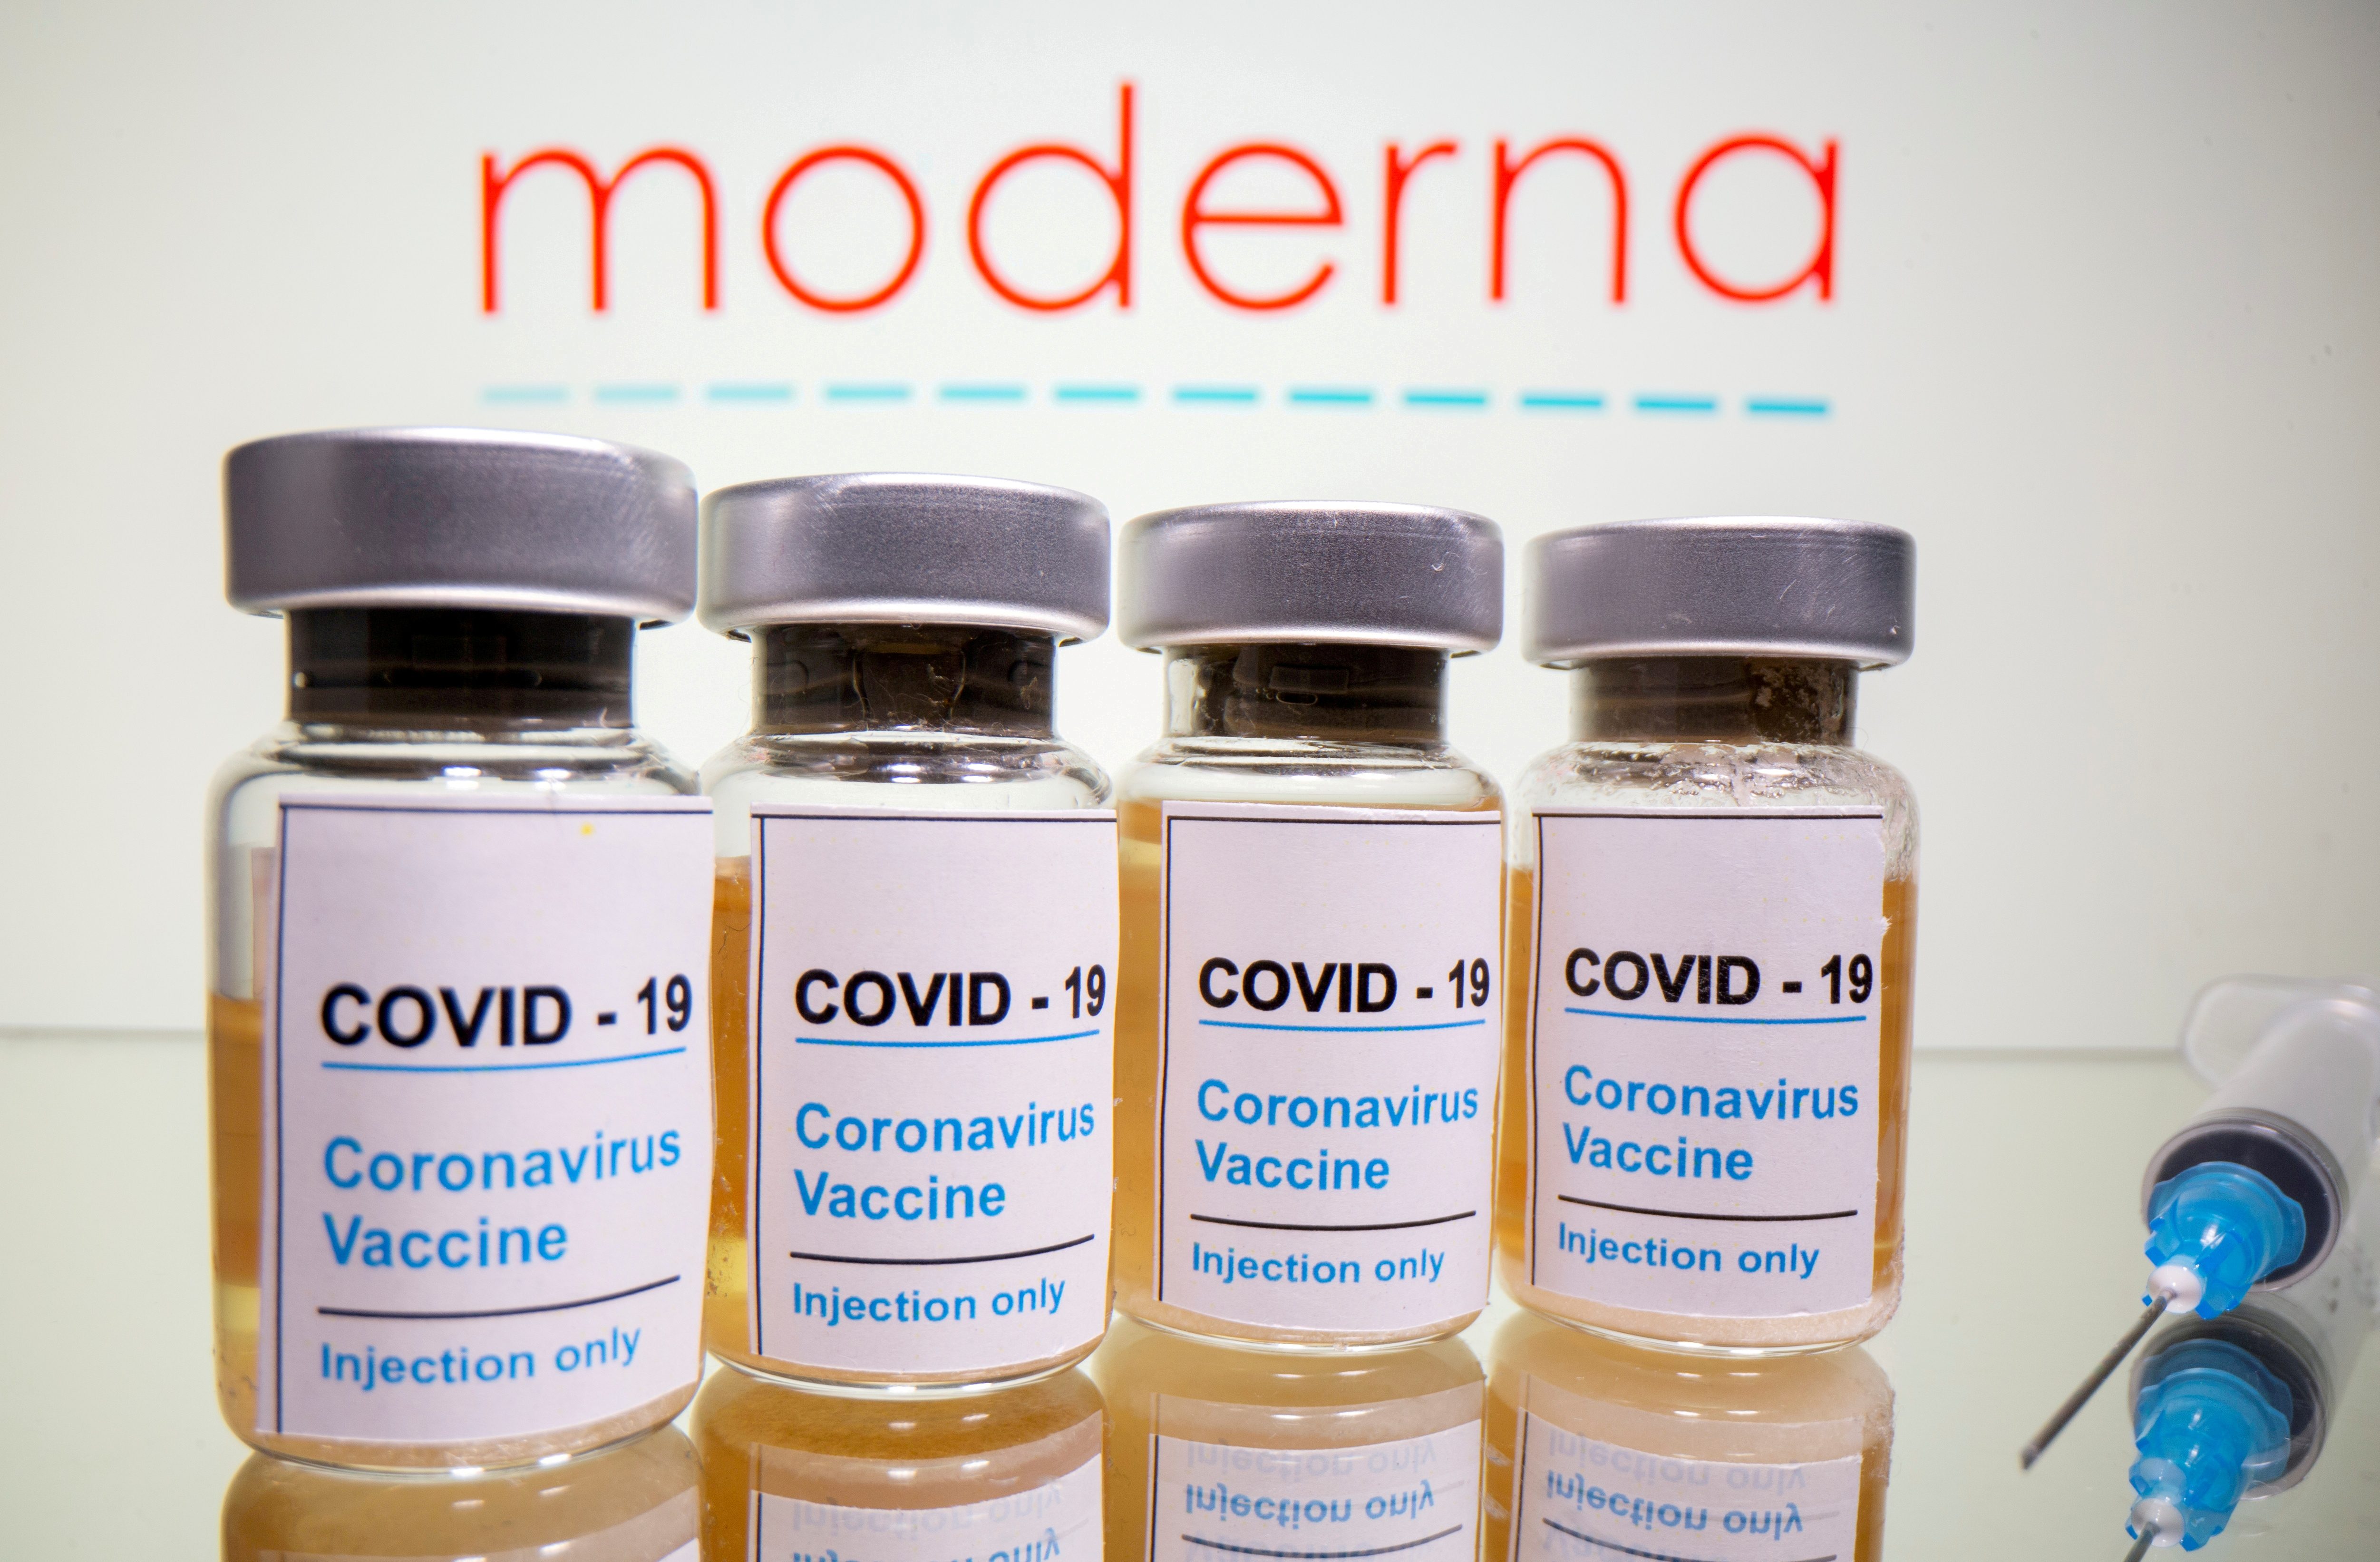 Japan’s Moderna vaccine contamination woes widen as 1 million more shots withdrawn